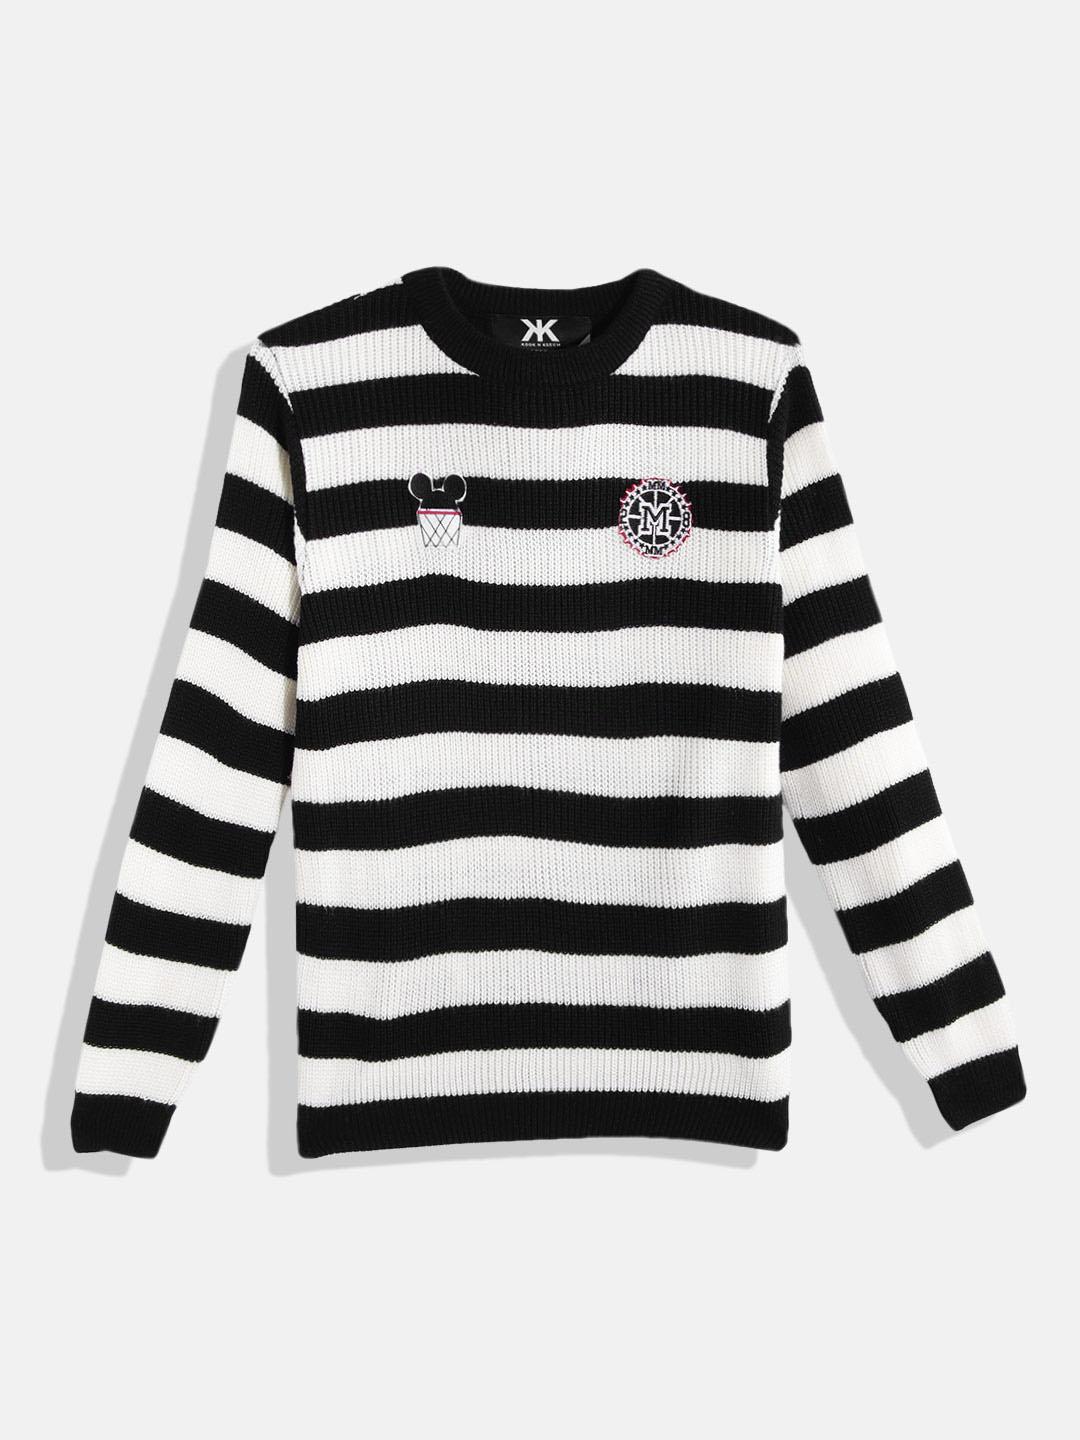 kook n keech teens boys black & off white striped pullover with mickey mouse applique